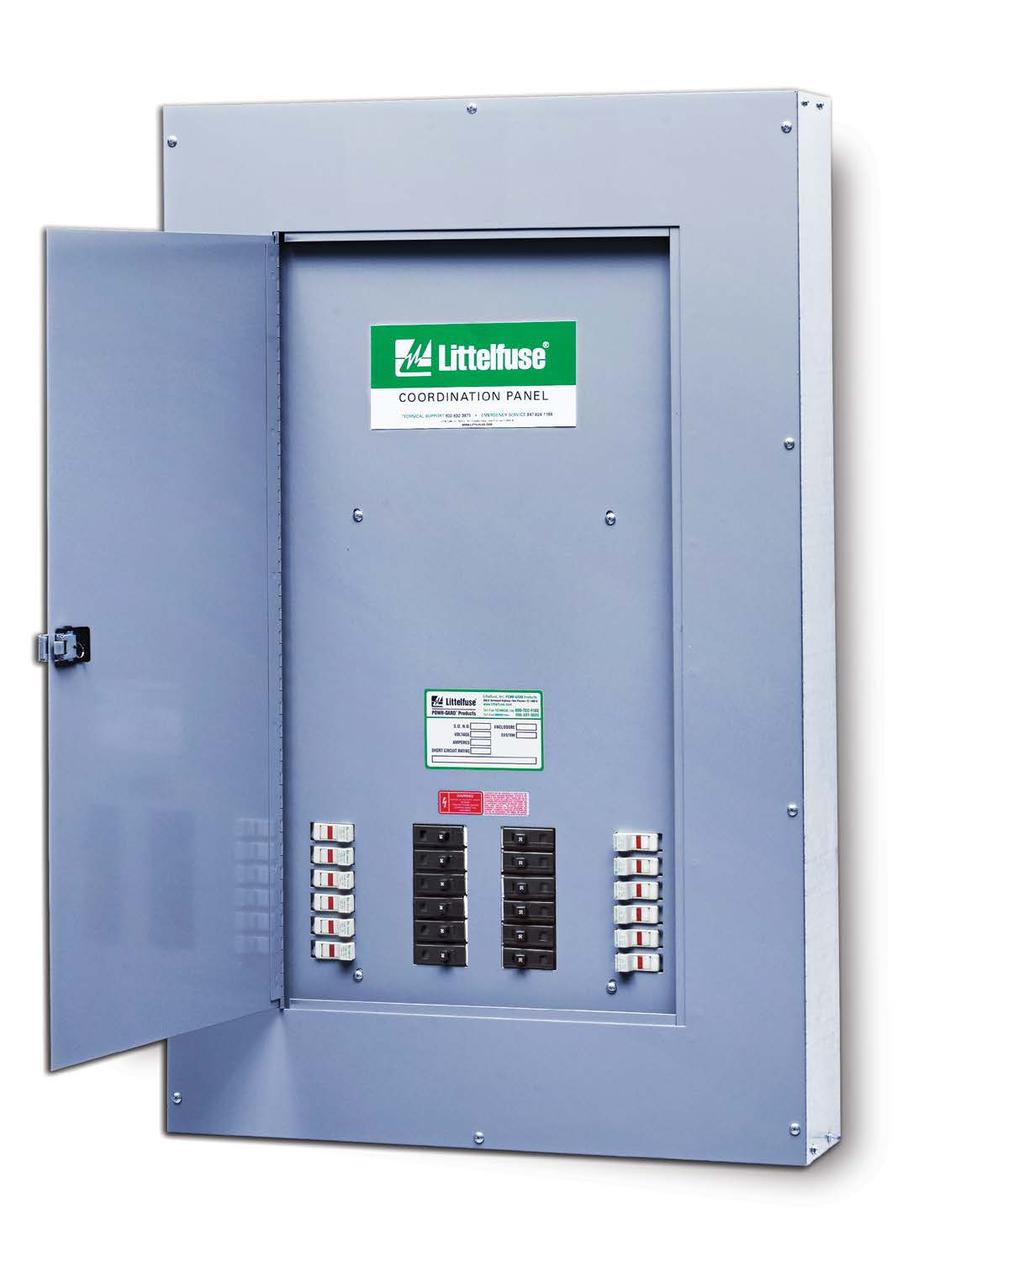 OVERVIEW The Littelfuse LCP Selective Coordination Panel uses circuit breakers in series with fuses and fuse holders to respond to overloads and short-circuits, respectively, in order to achieve